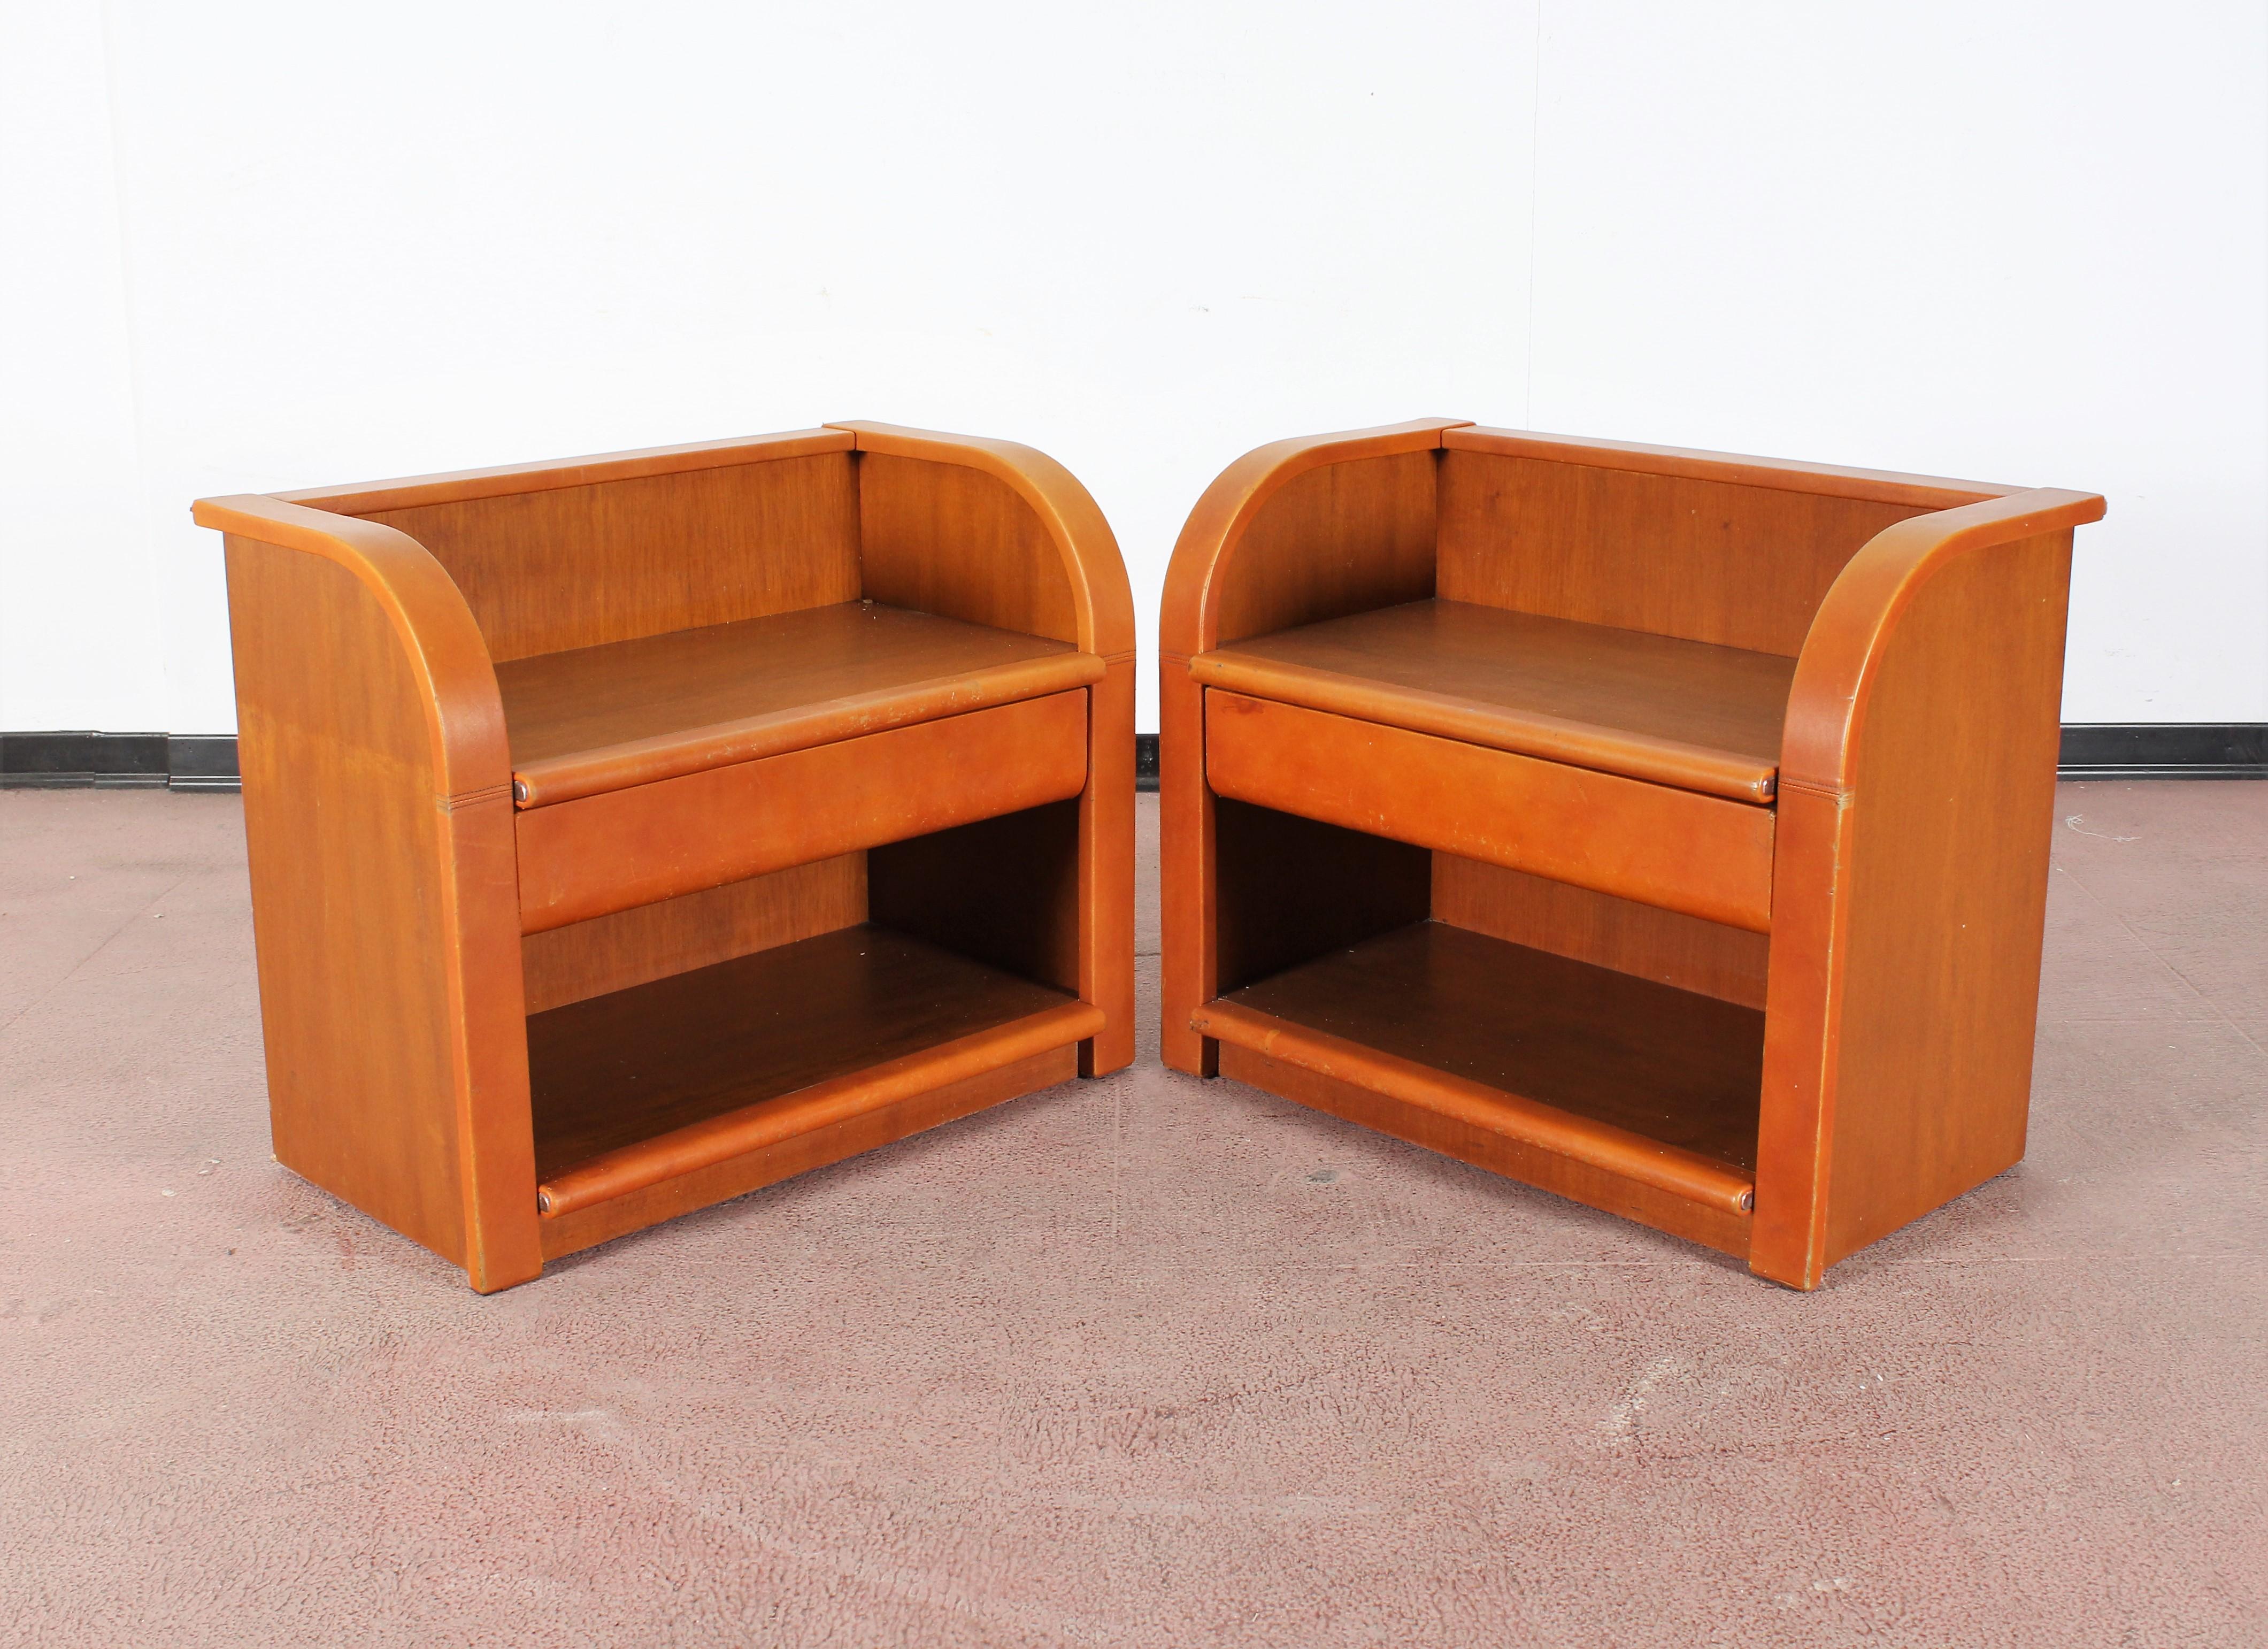 Italian Midcentury Wood and Leather Poltrona Frau Nightstands, Set of 2, Italy, 1960s